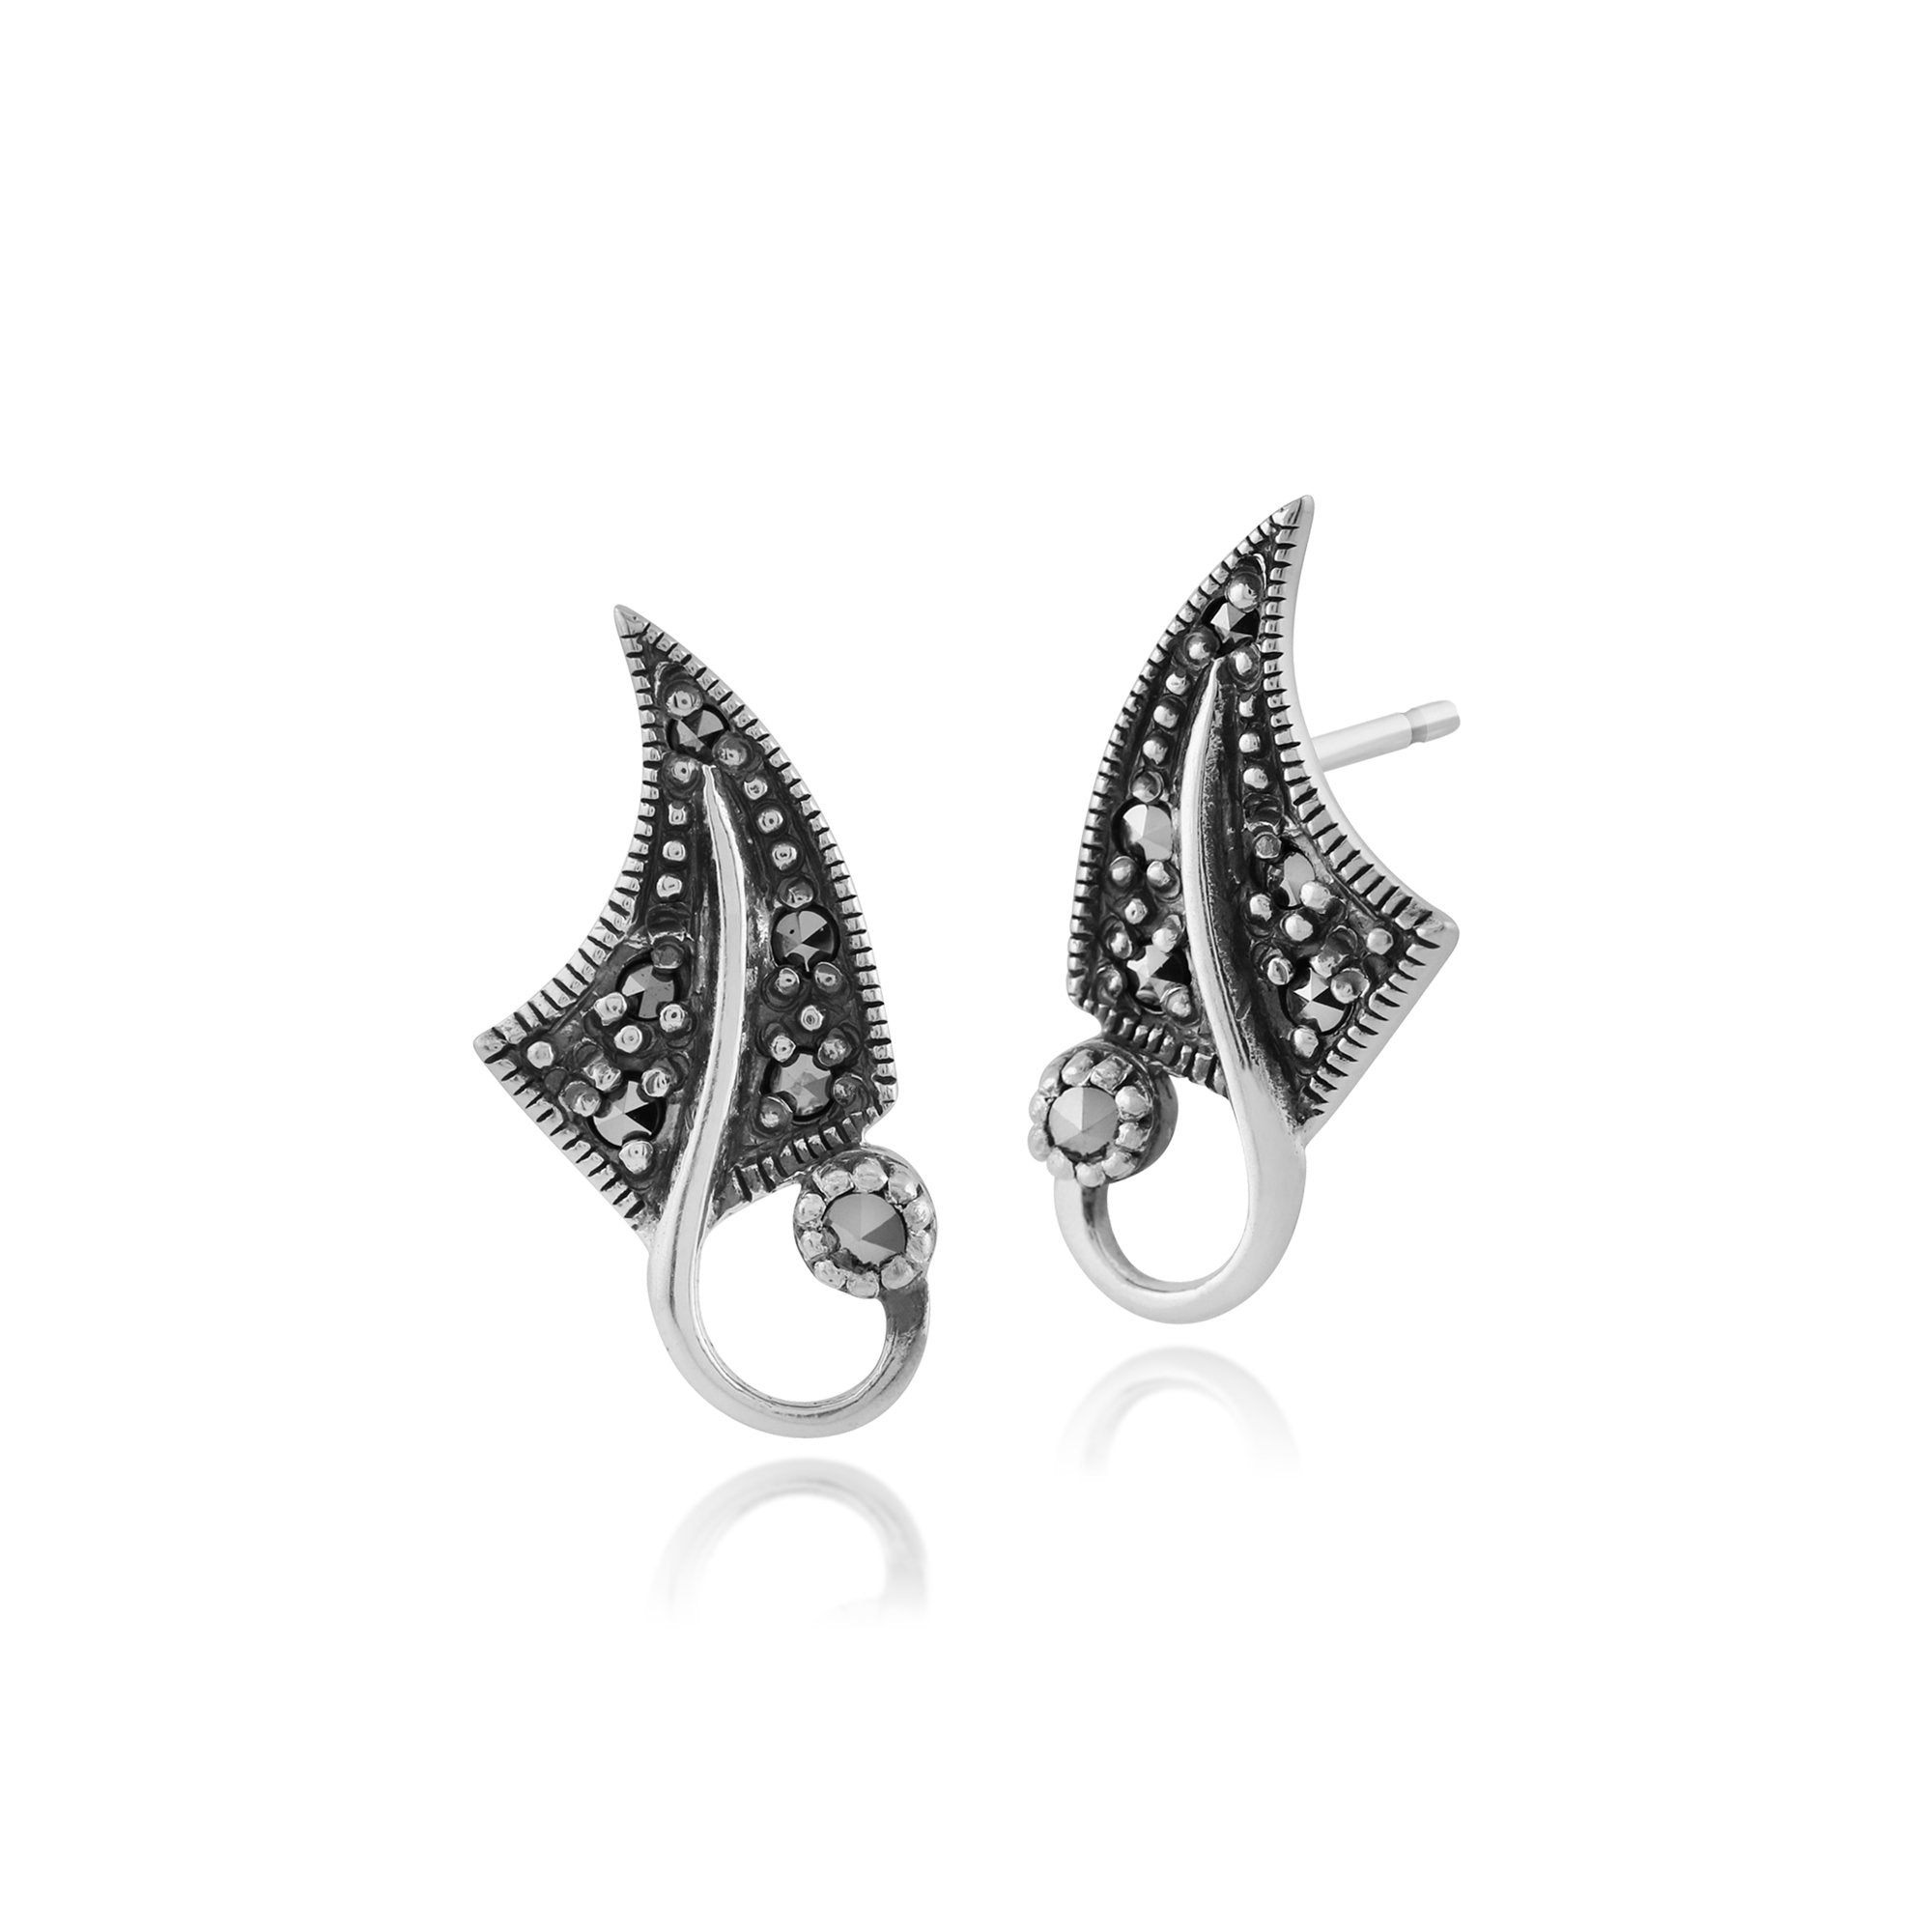 Art Nouveau Style Round Marcasite Leaf Stud Earrings in 925 Sterling Silver